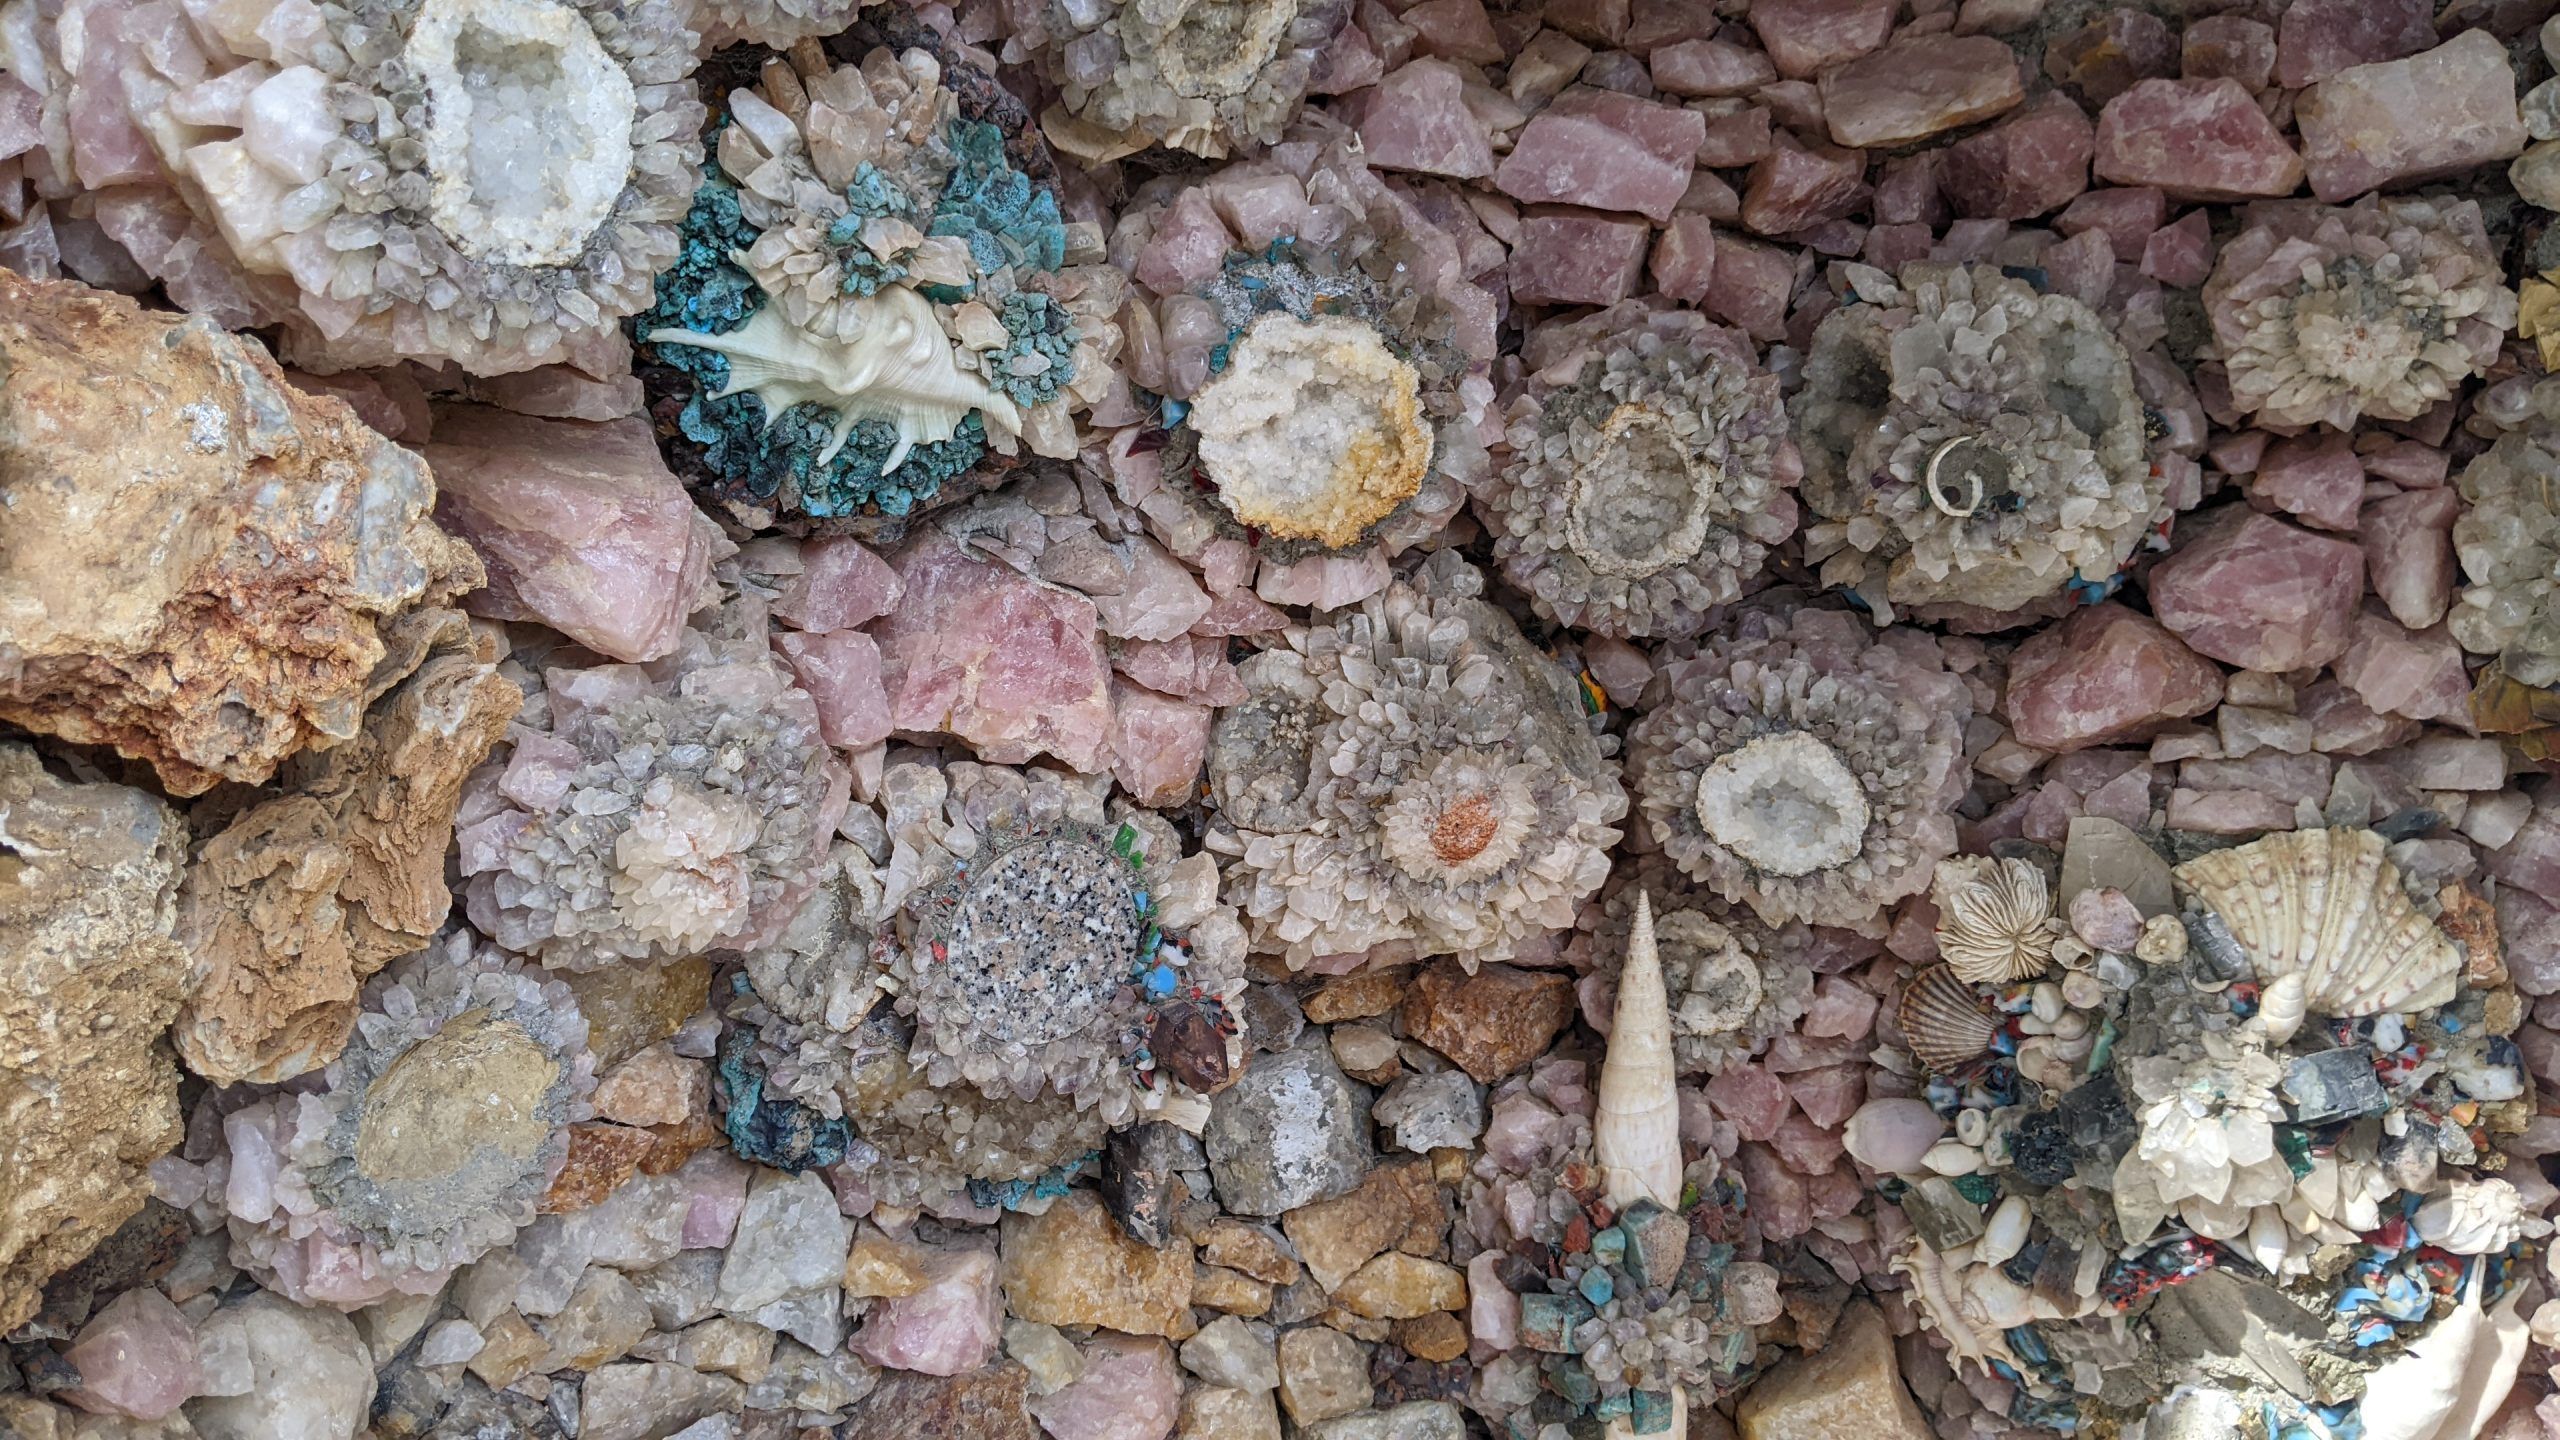 Shells midst the rocks and crystals and gems.